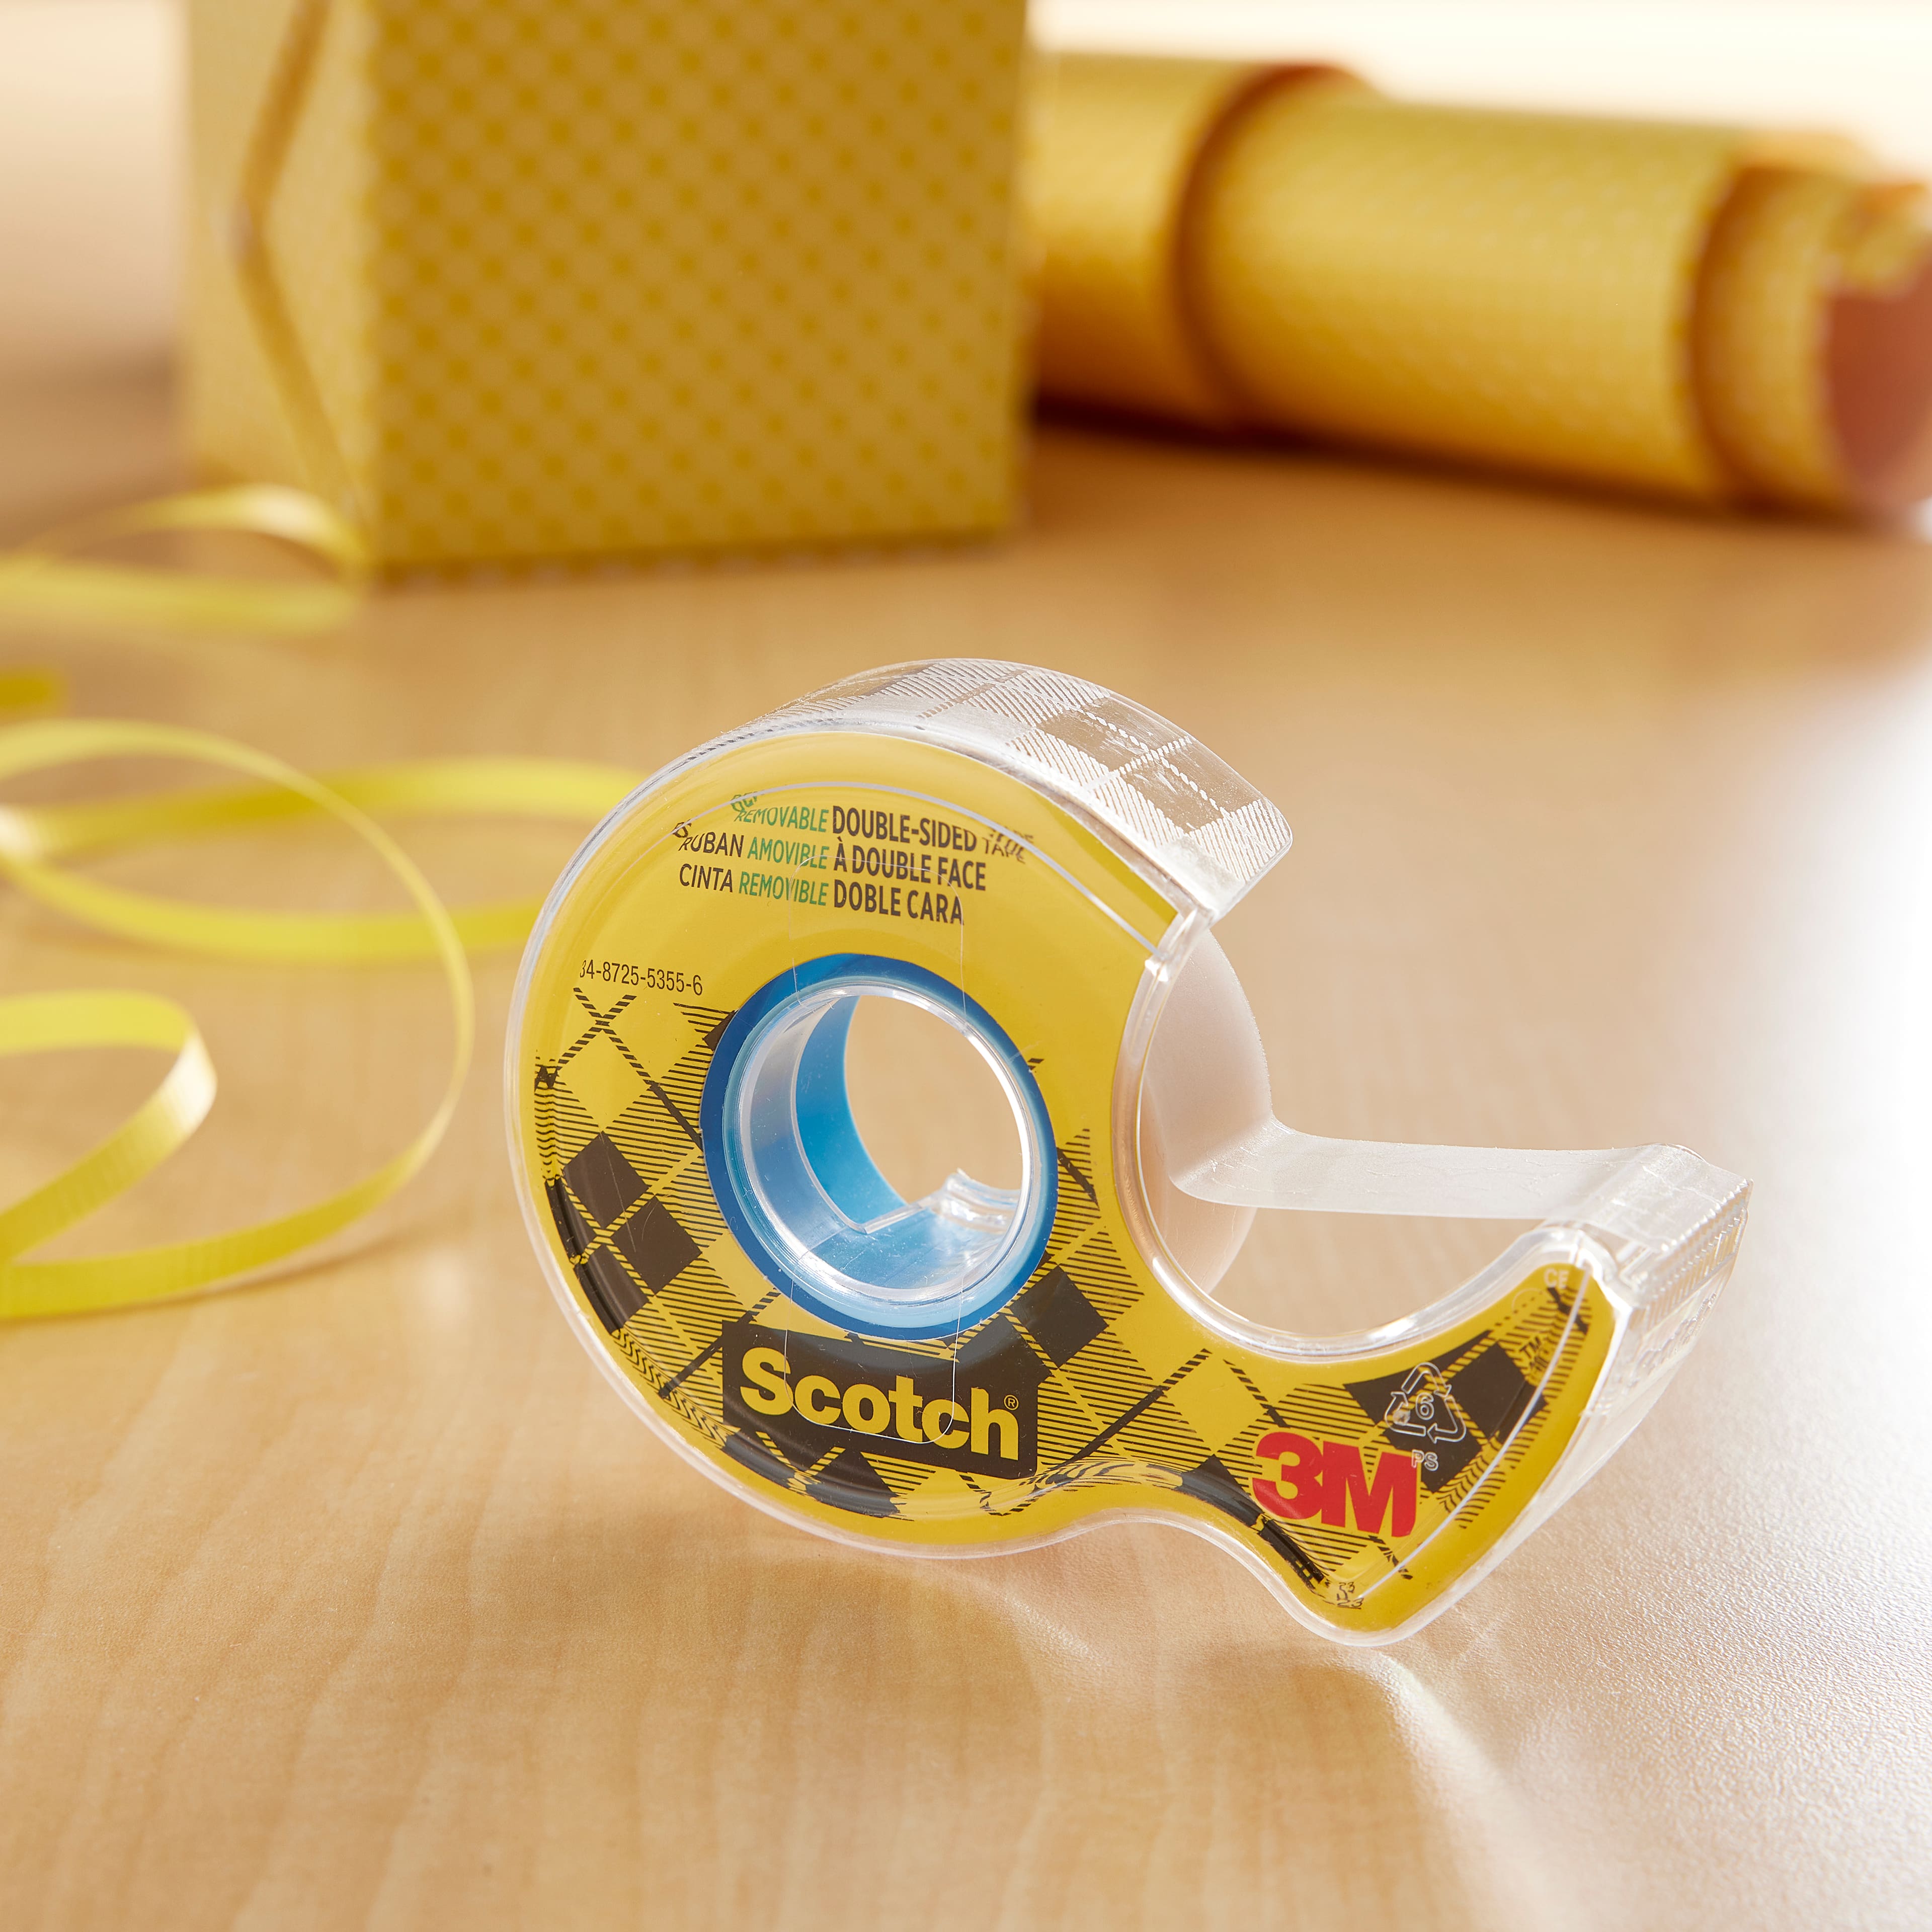 Scotch Removable Double-Sided Tape [Linerless]